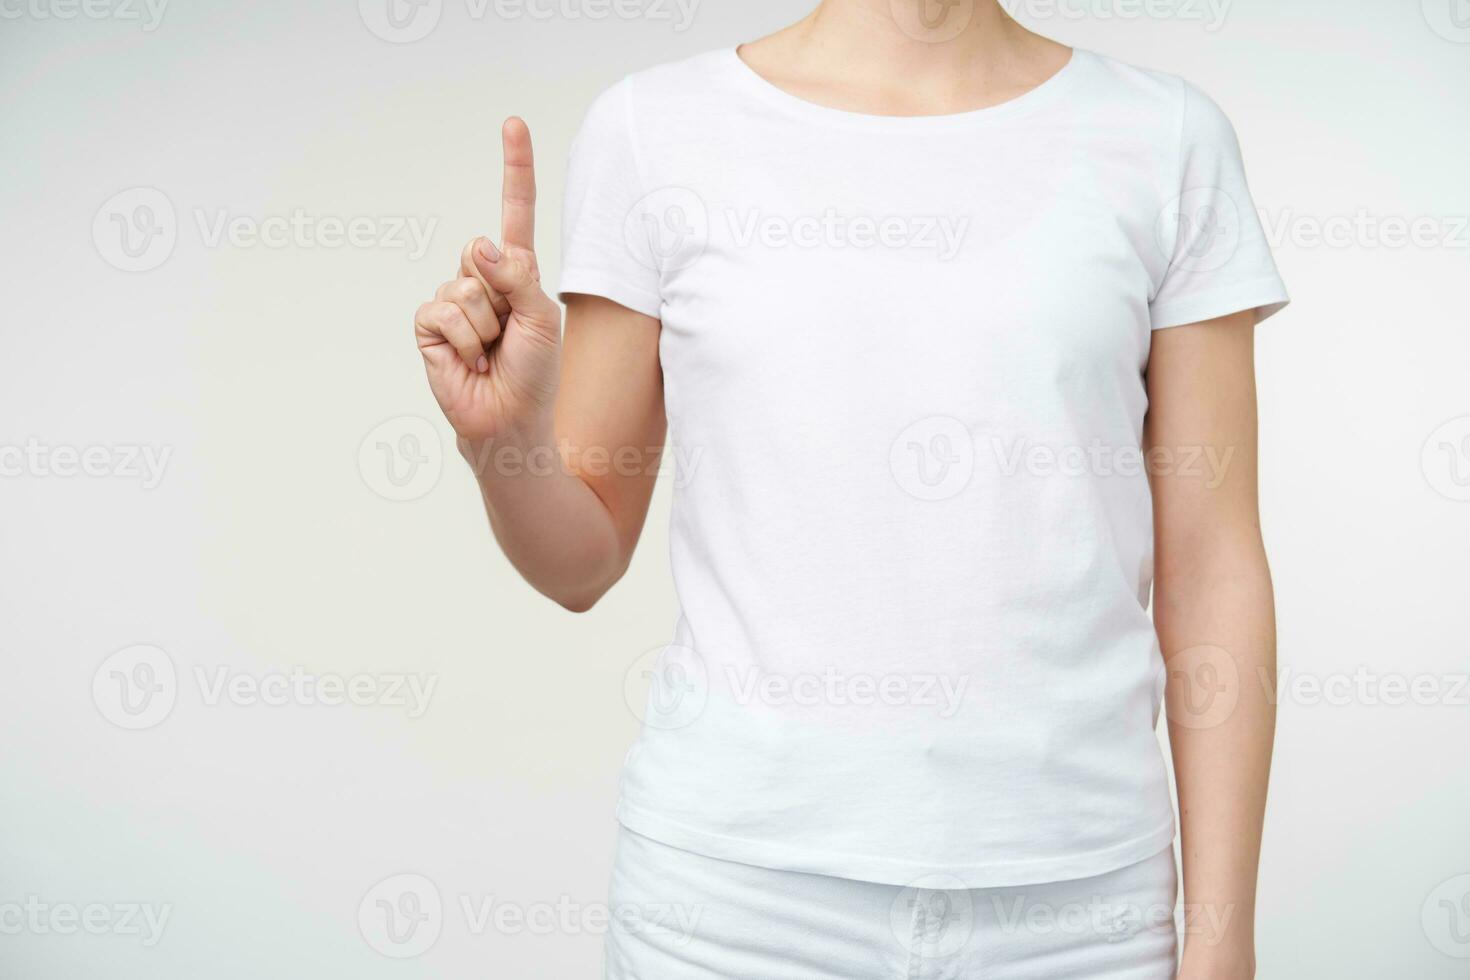 Studio photo of young woman dressed in white t-shirt while posing over white background, keeping forefinger raised while counting one. Hands and gesturing concept